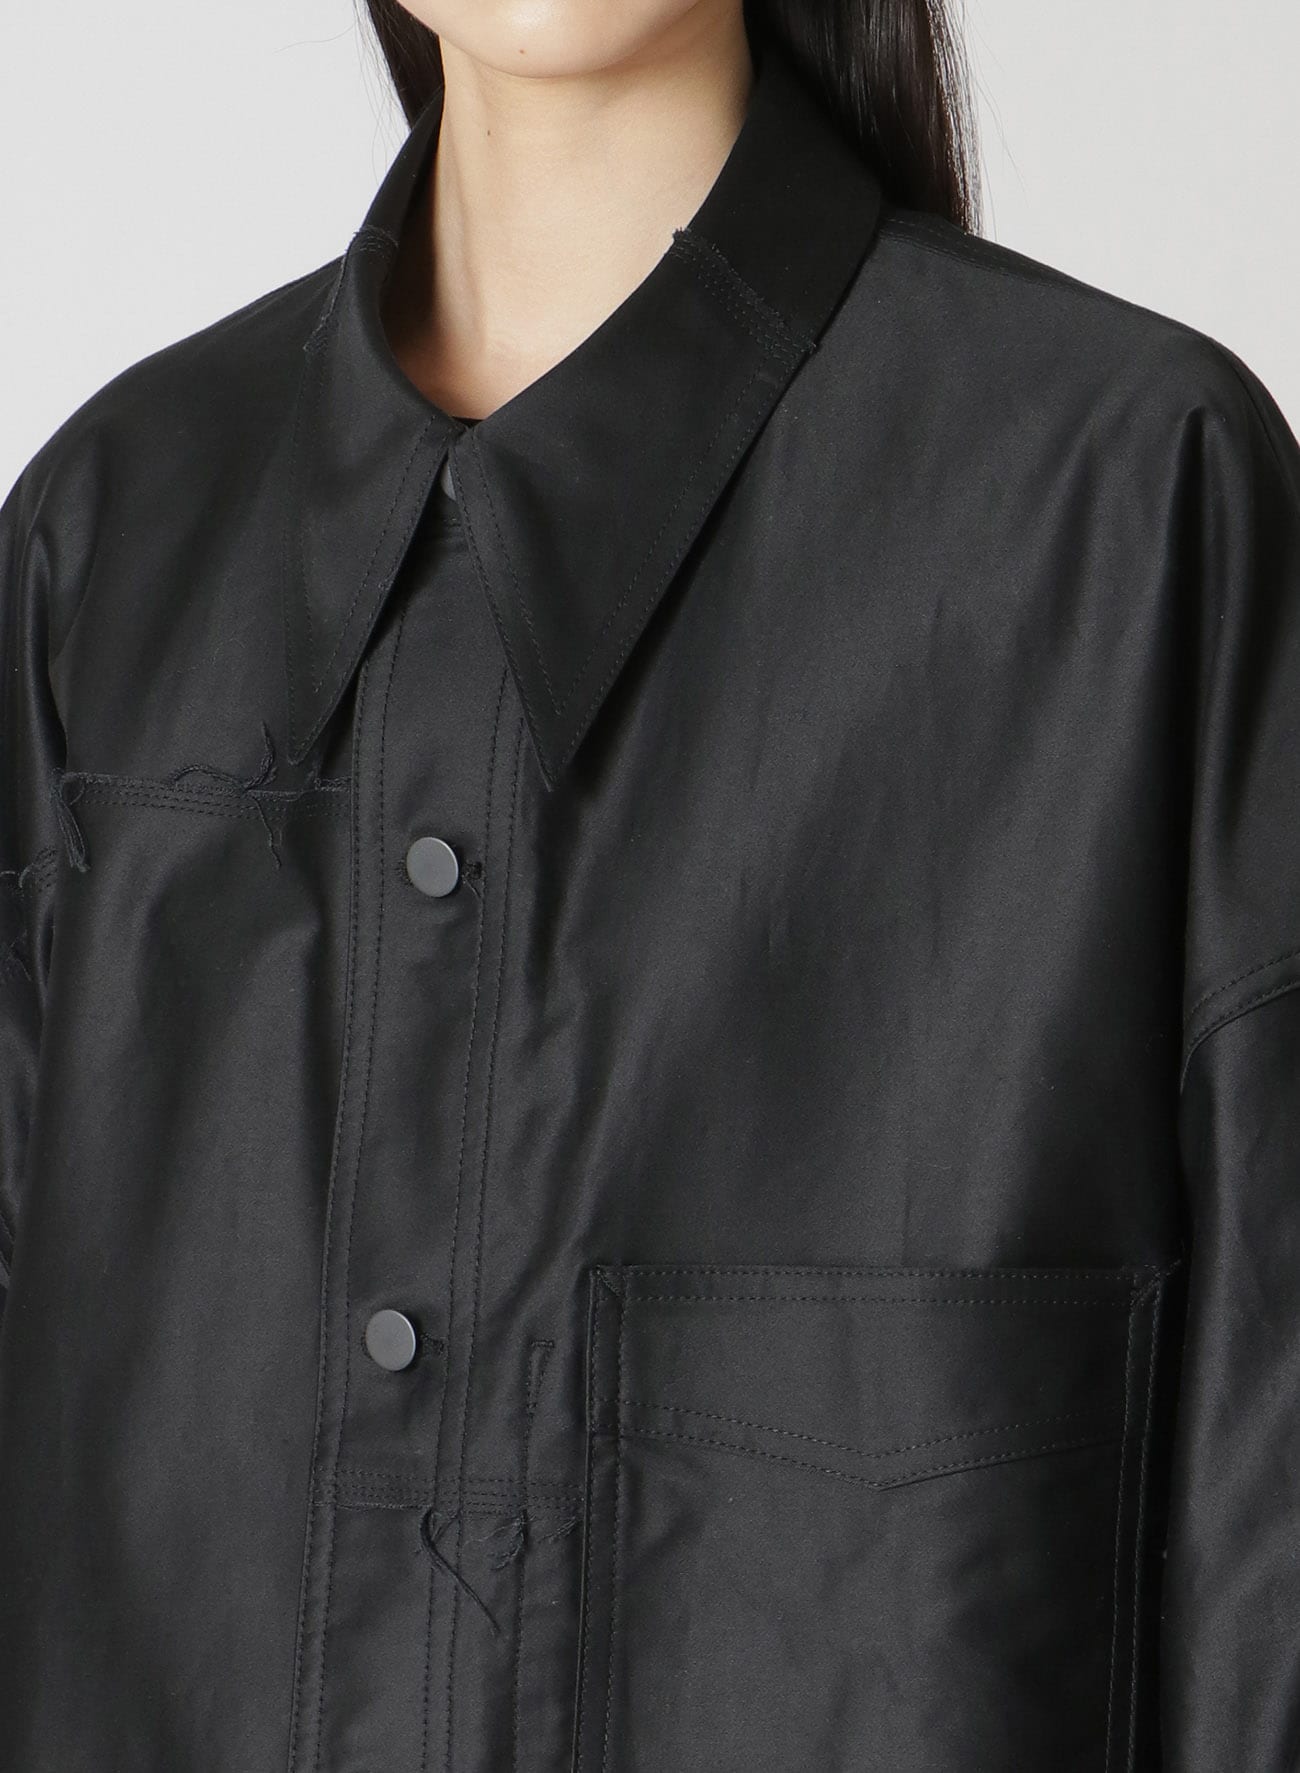 EXTRA LONG STAPLE COTTON MOLESKIN PATCHED JACKET